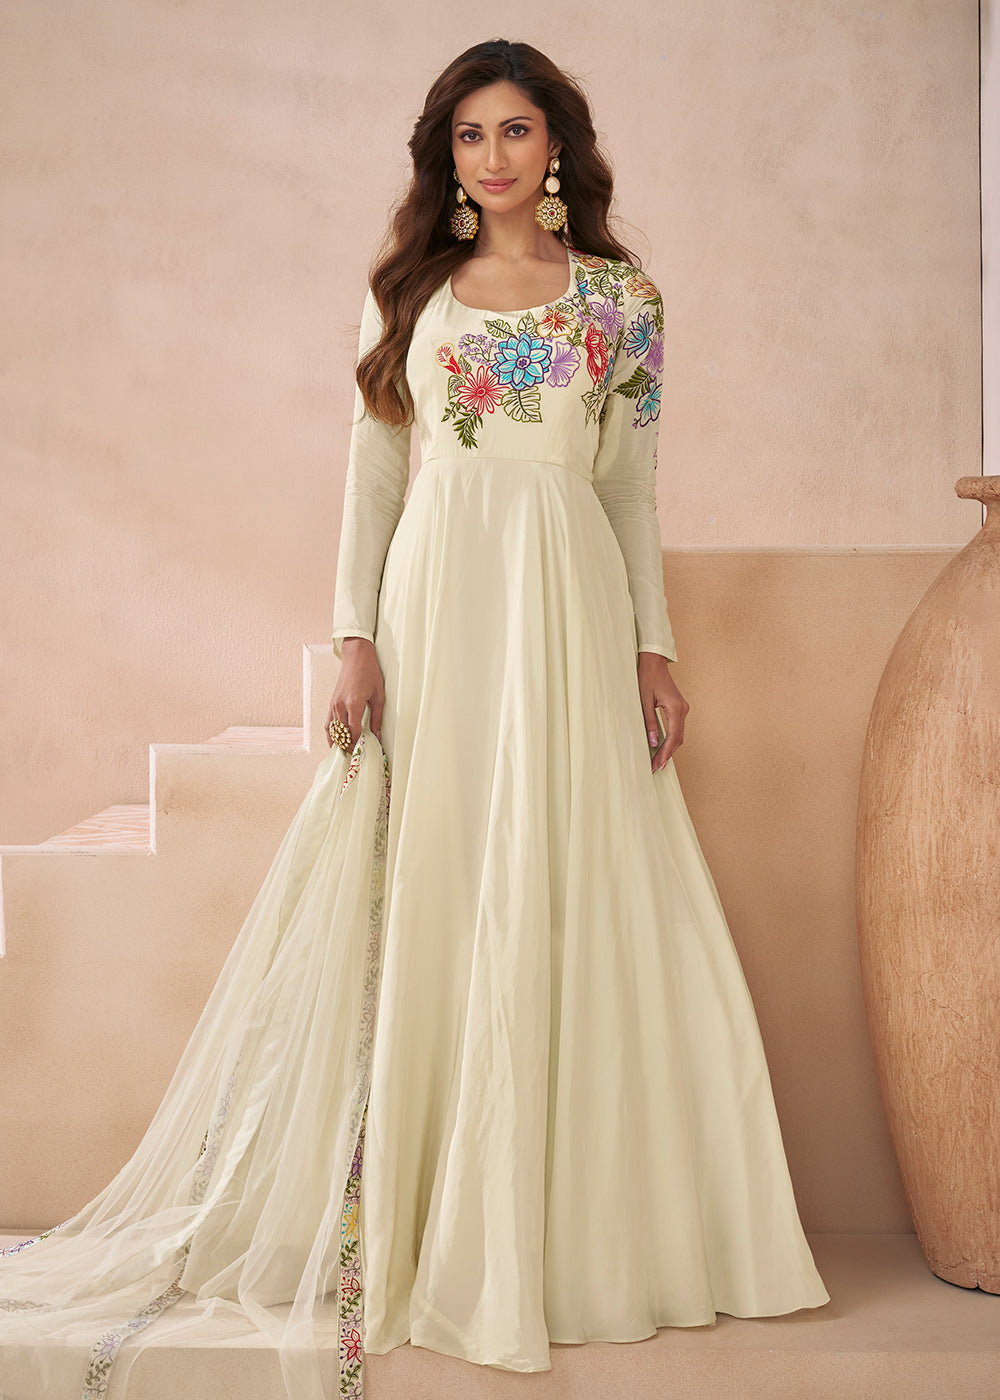 Buy Now Trendy Off White Silk Embroidered Anarkali Gown Online in USA, UK, Australia, New Zealand, Canada & Worldwide at Empress Clothing.